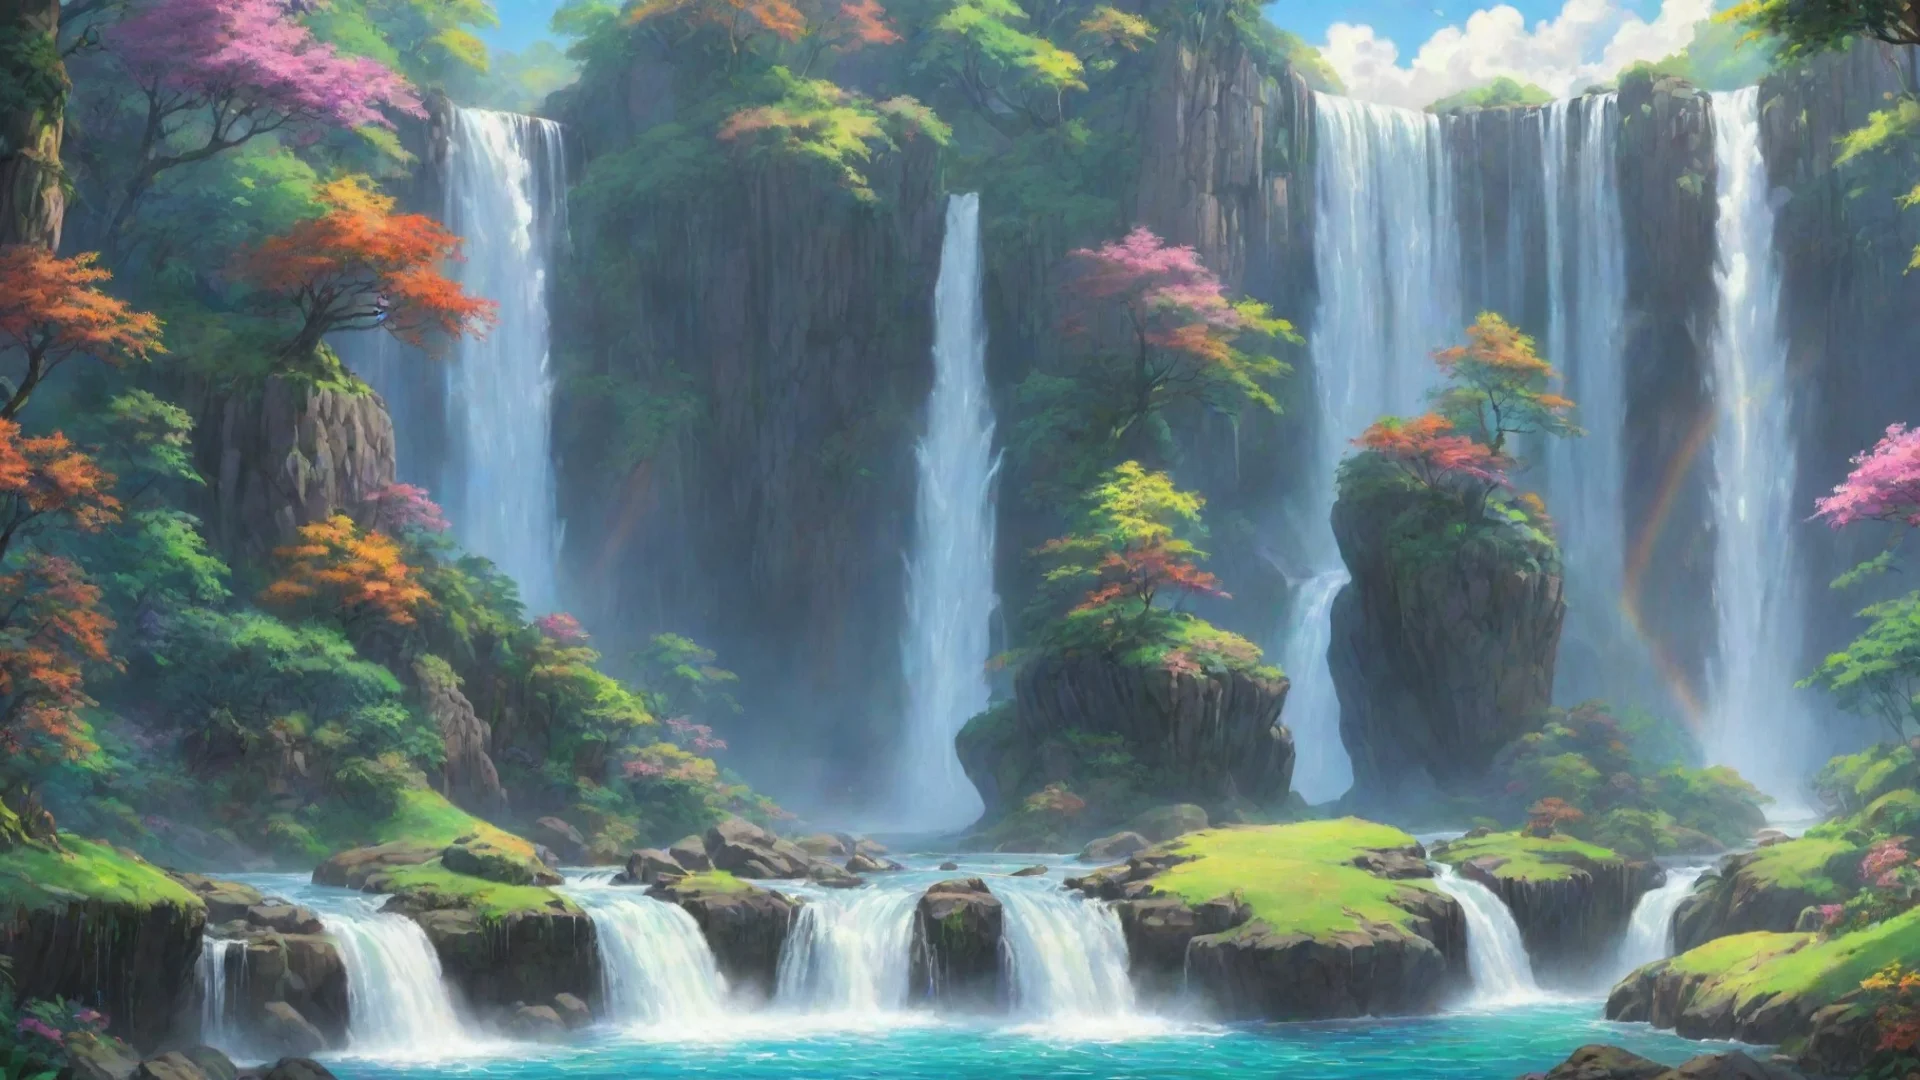 lowfi relaxing calming on colorful chilling relaxing with lush wonderful environment waterfalls rainbows hd ghibli fantasy fantastic wide